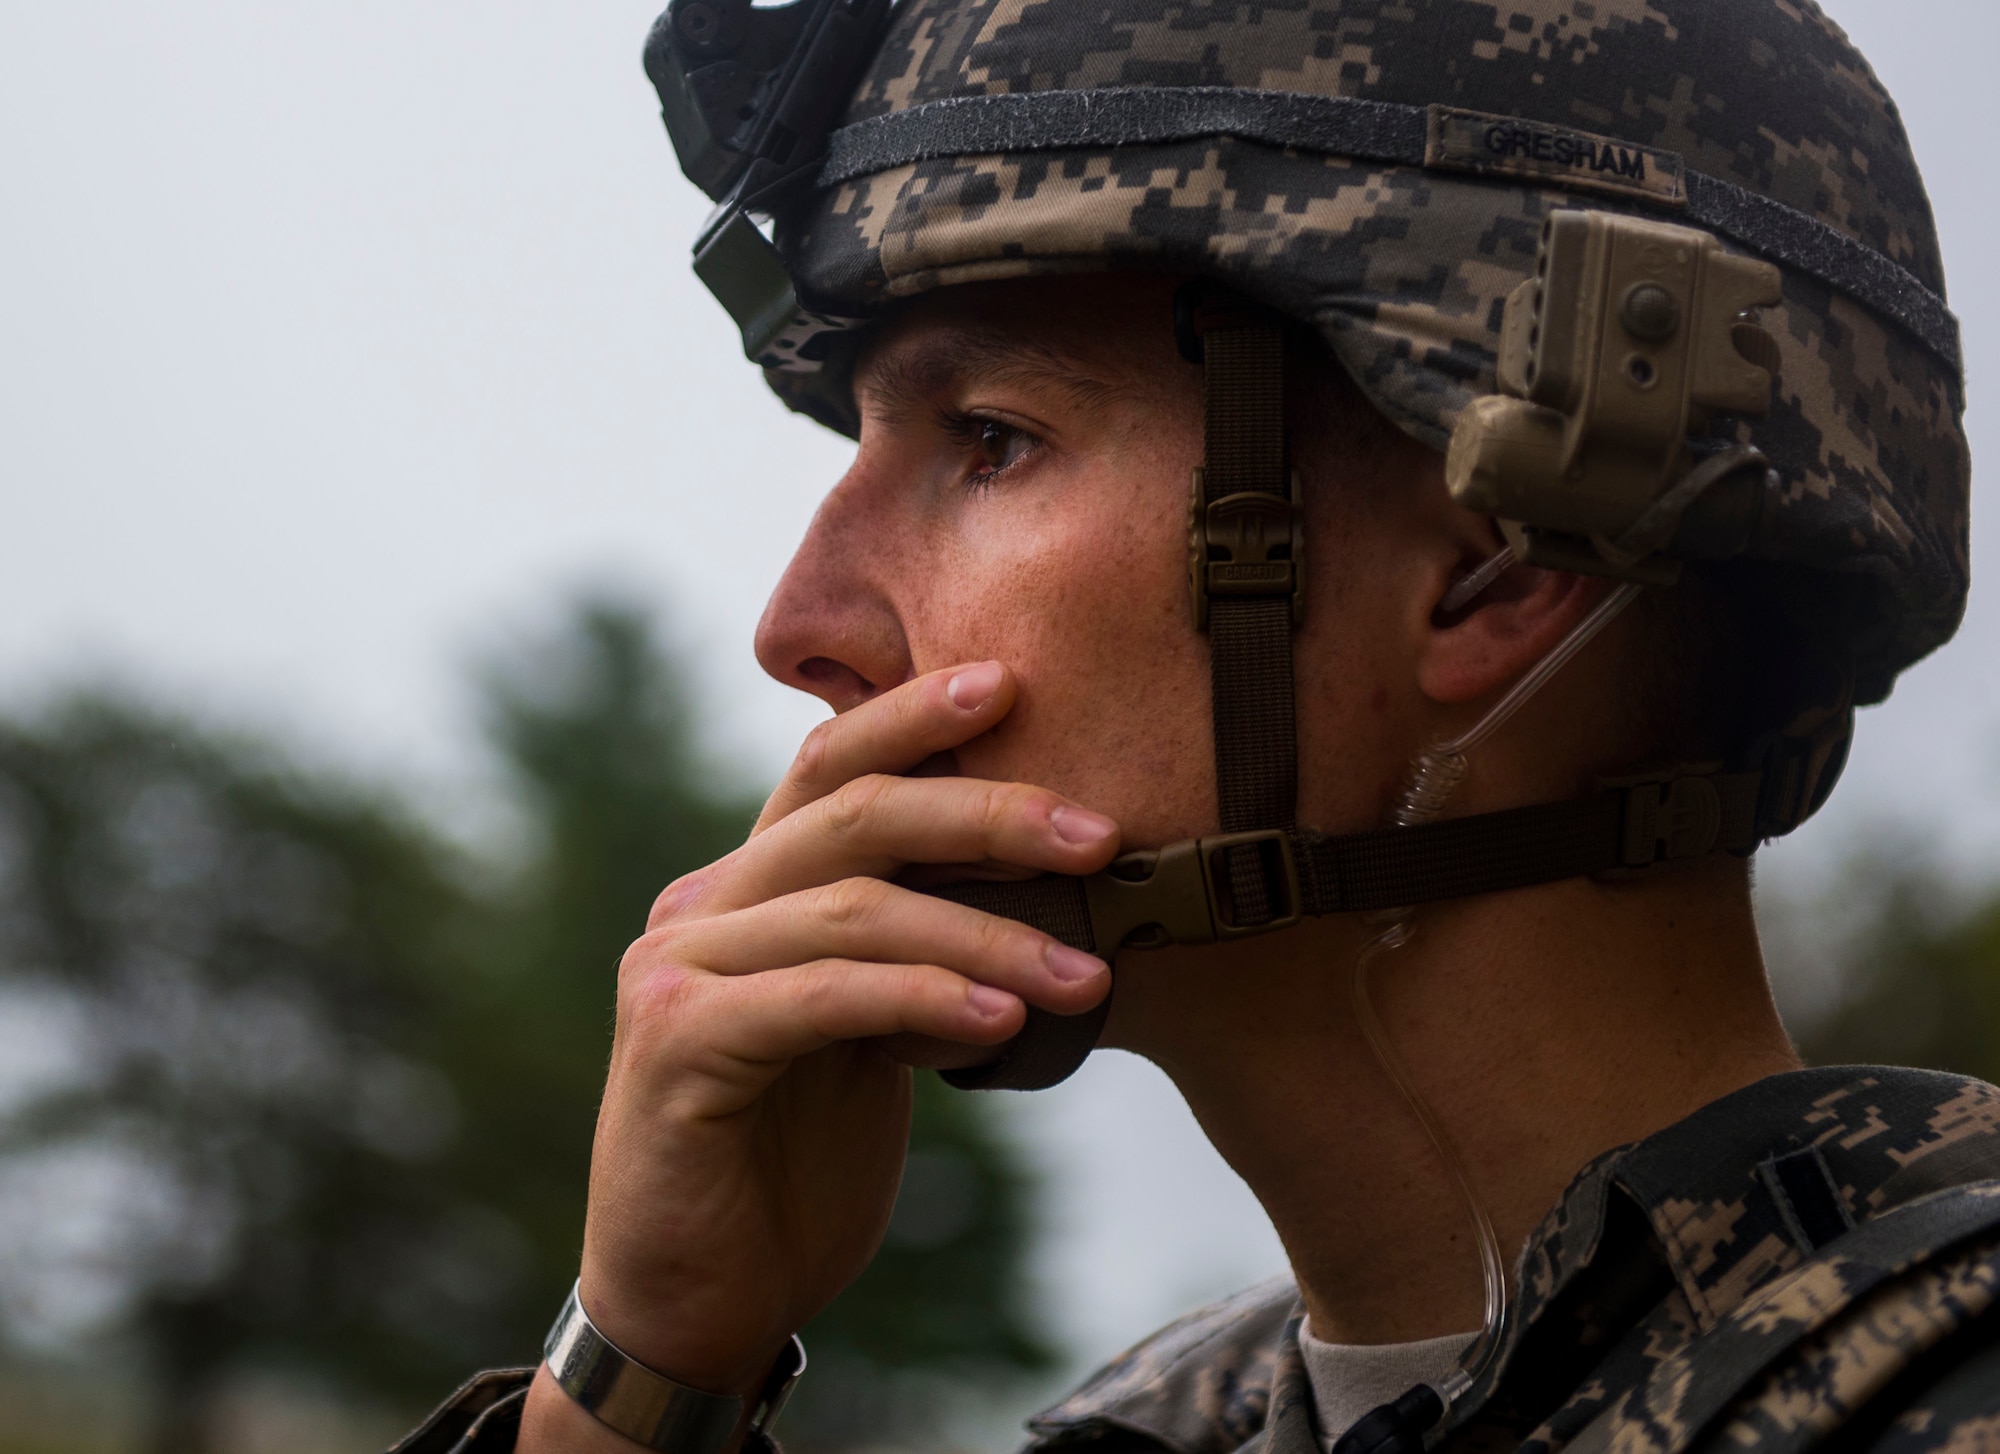 1st Lt. Christopher Gresham, 375th Security Forces Squadron, wipes his face as he learns that additional rooms may have people in them during an active shooter exercise, Scott Air Force Base, Ill., Sept. 9, 2016.  With an increase of mass shootings, the Department of Defense has trained personnel and first responders on how to respond in an active shooter situation.